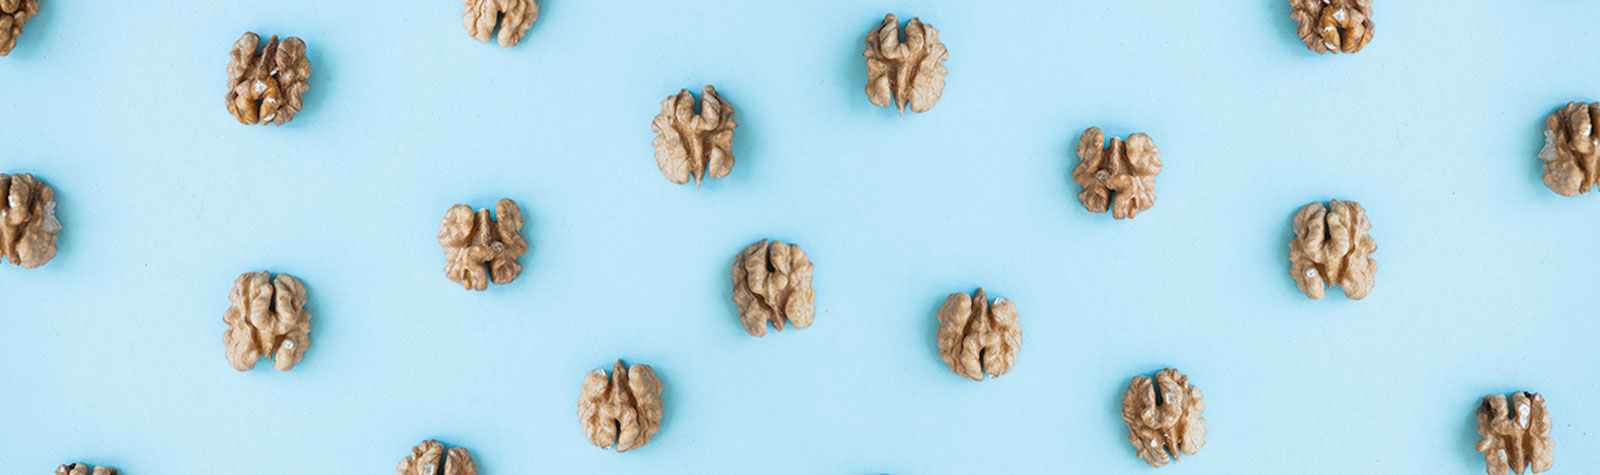 Nuts-that-are-good-for-the-brain